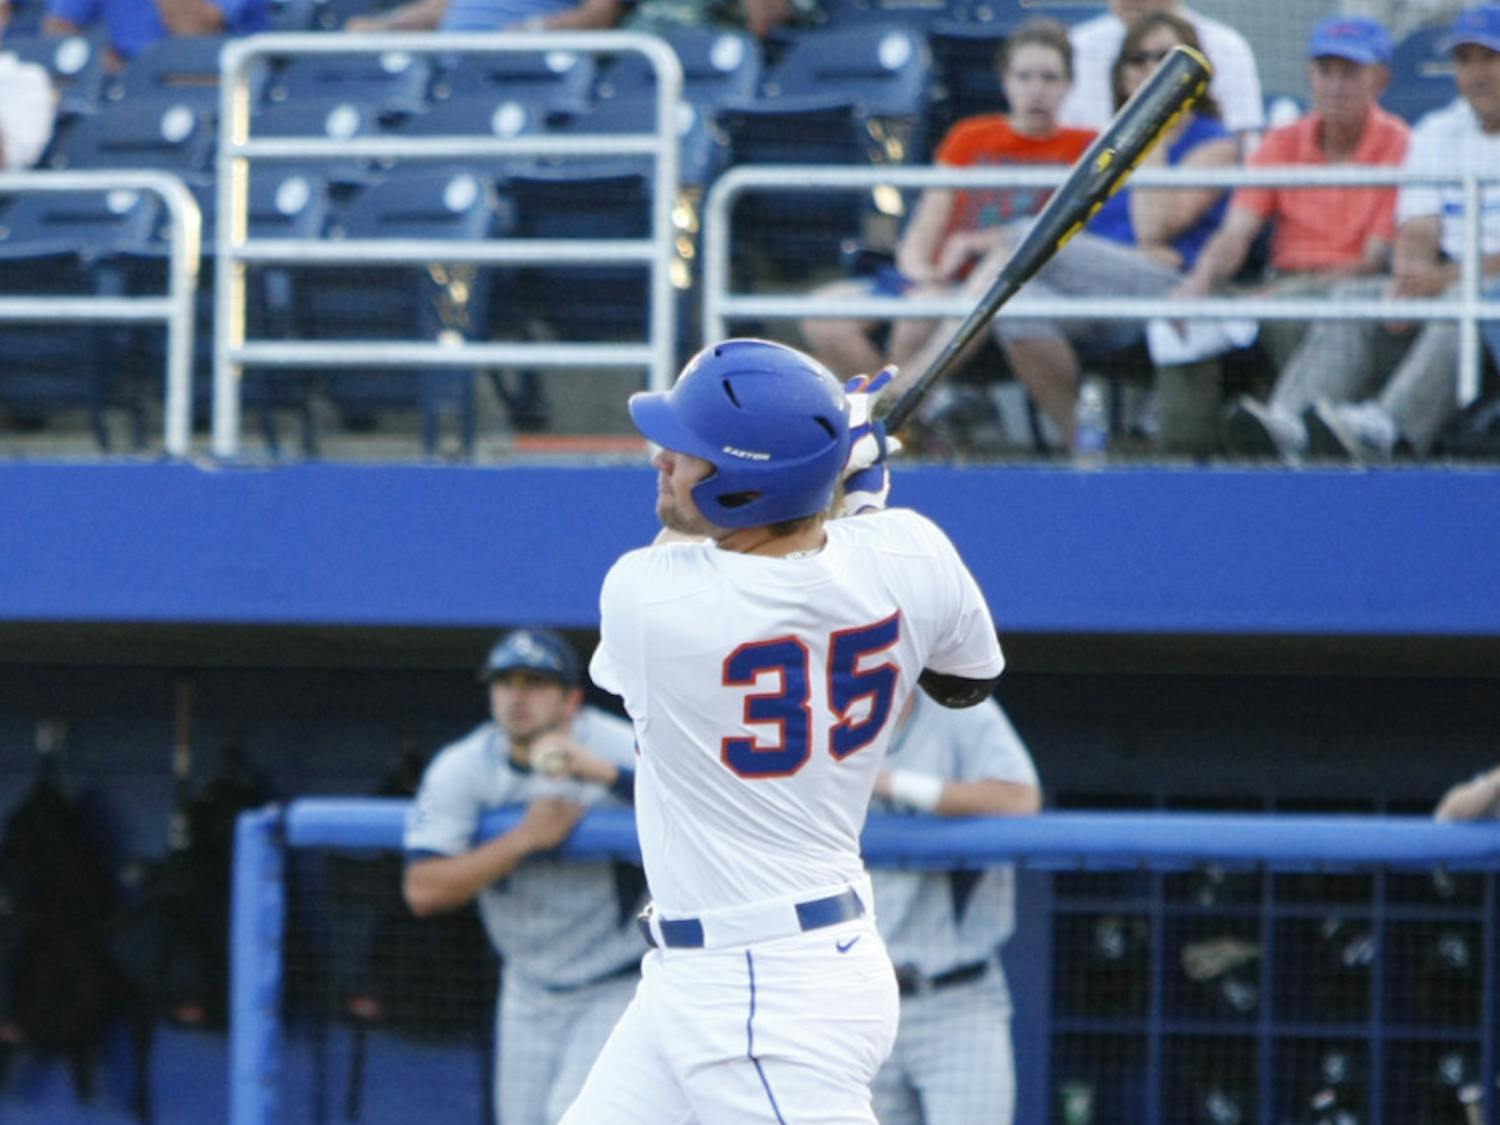 Florida junior Brian Johnson hits a three-run home run during the first inning of Tuesday’s win against Georgia Southern. Johnson tied a career high with five RBI in the win.